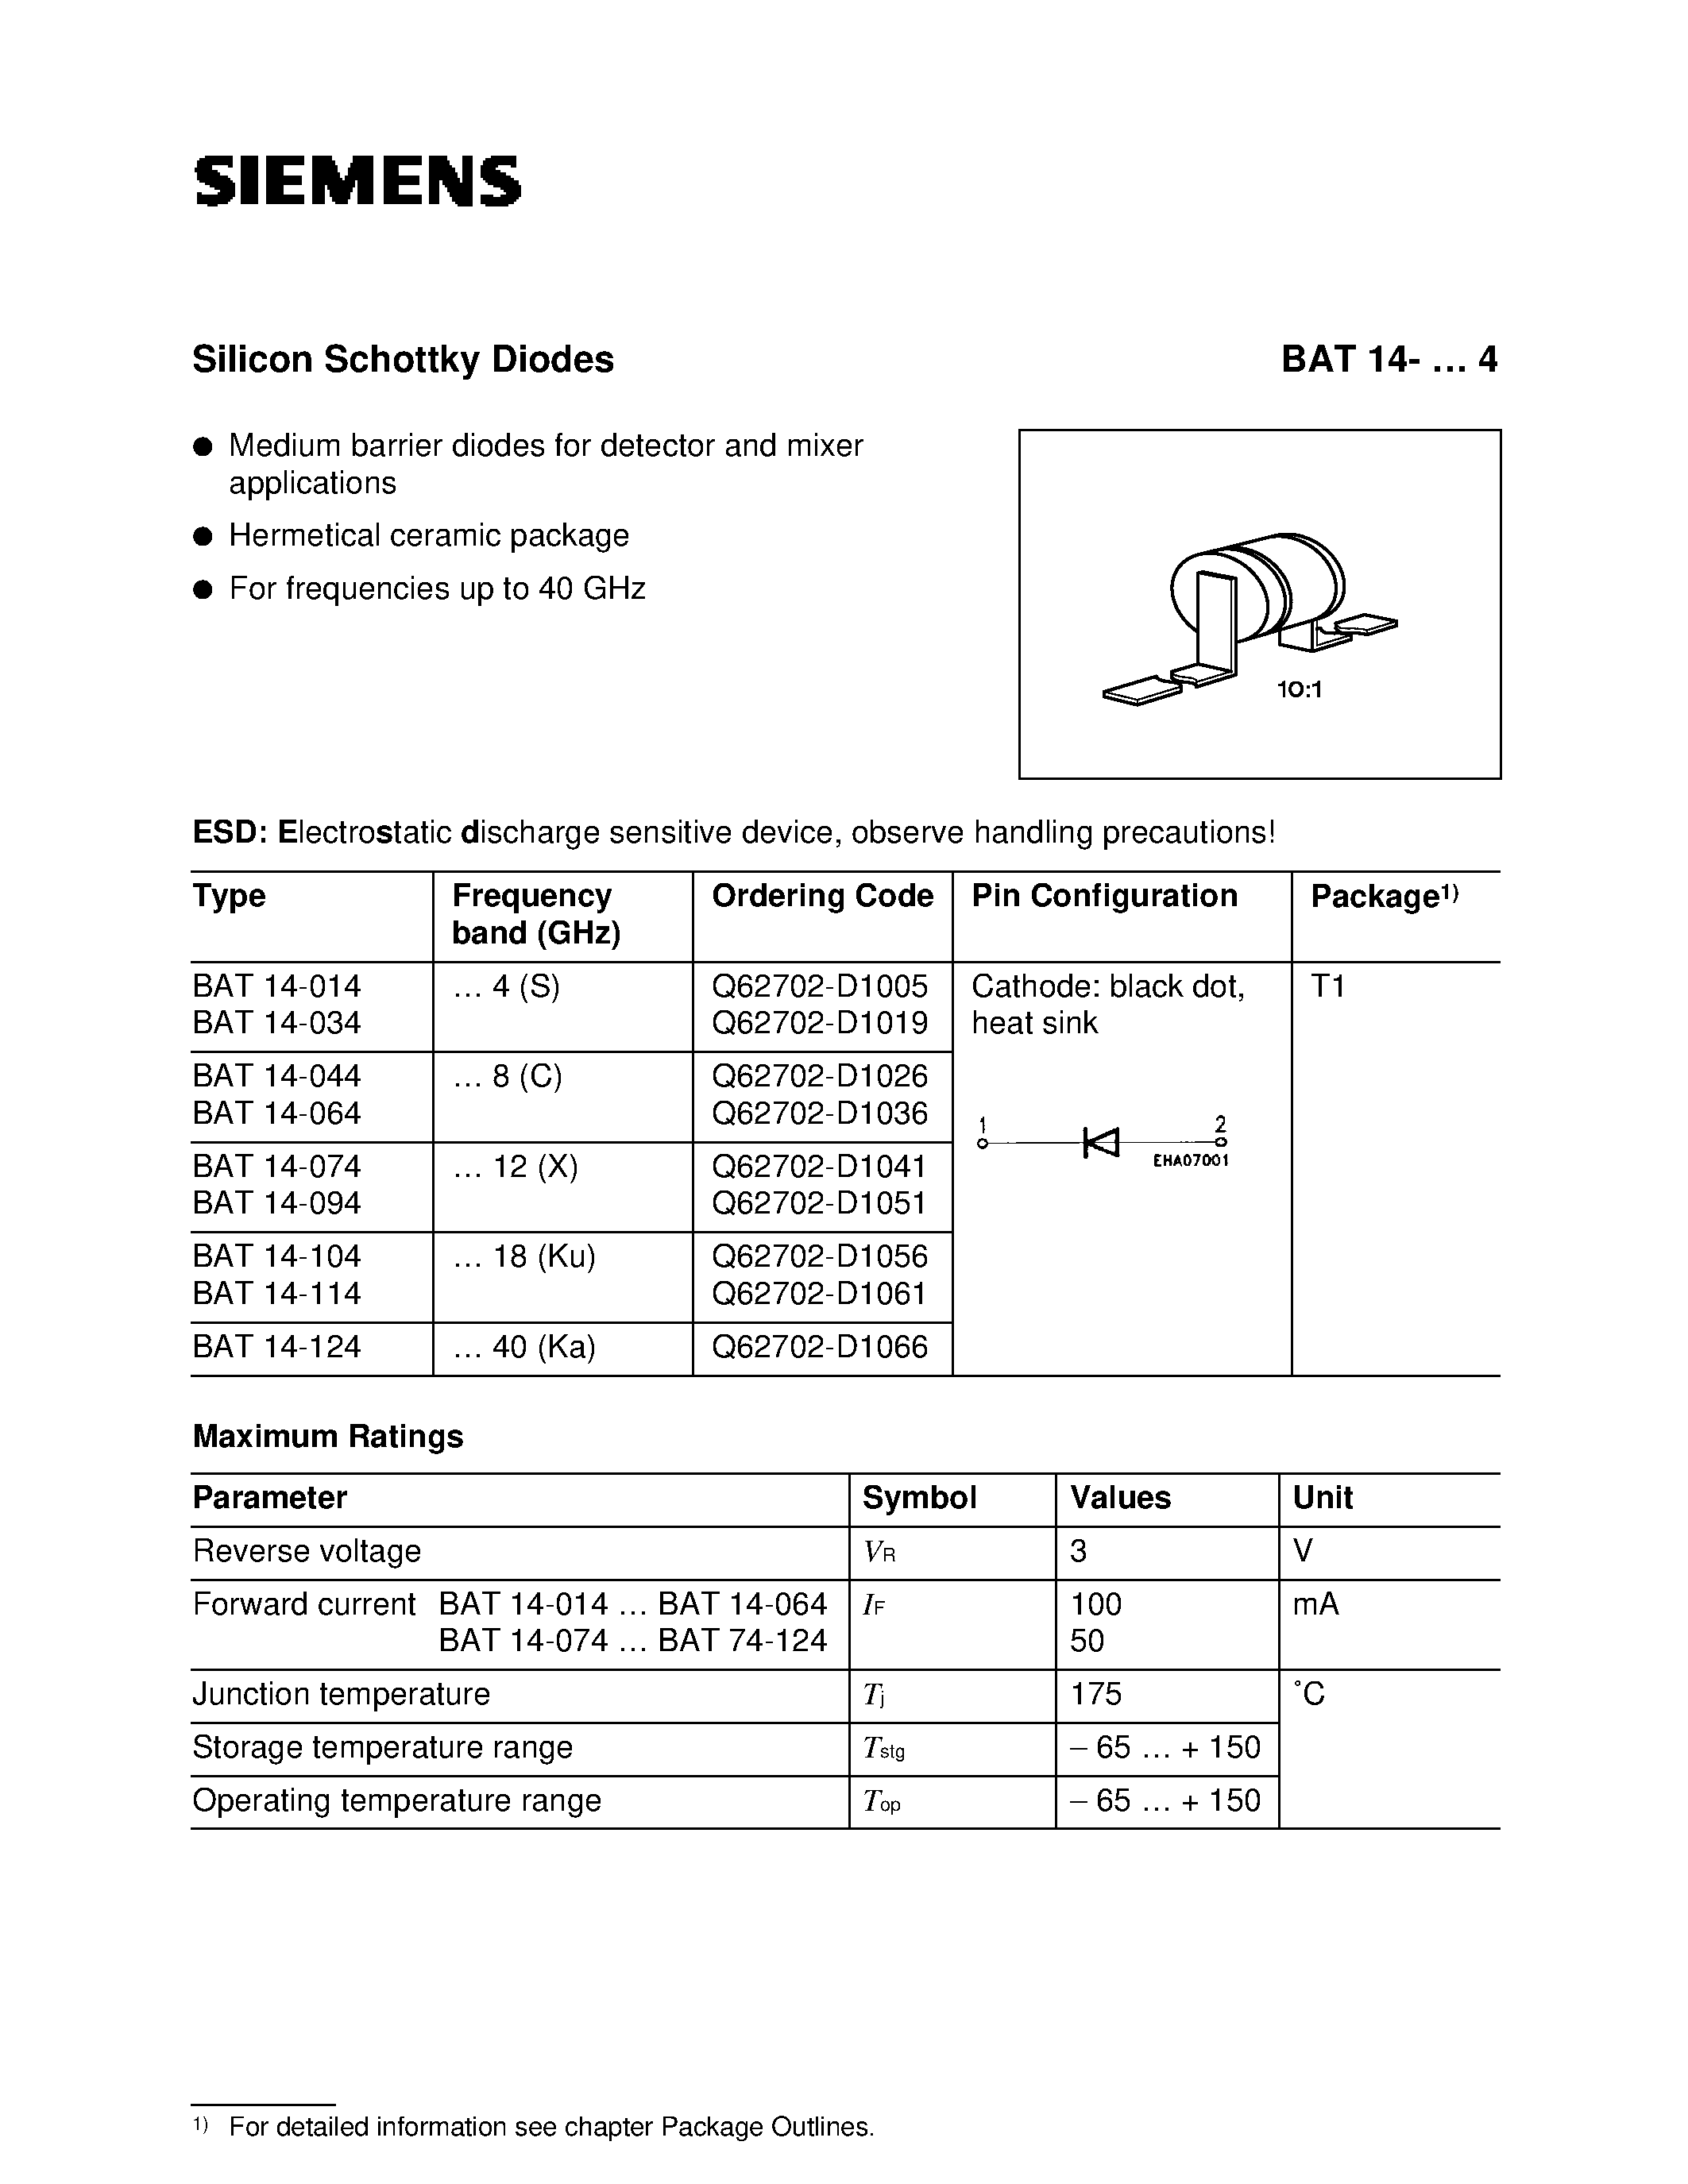 Datasheet BAT14-064 - HiRel Silicon Schottky Diode (HiRel Discrete and Microwave Semiconductor Medium barrier diodes for detector and mixer applications) page 1